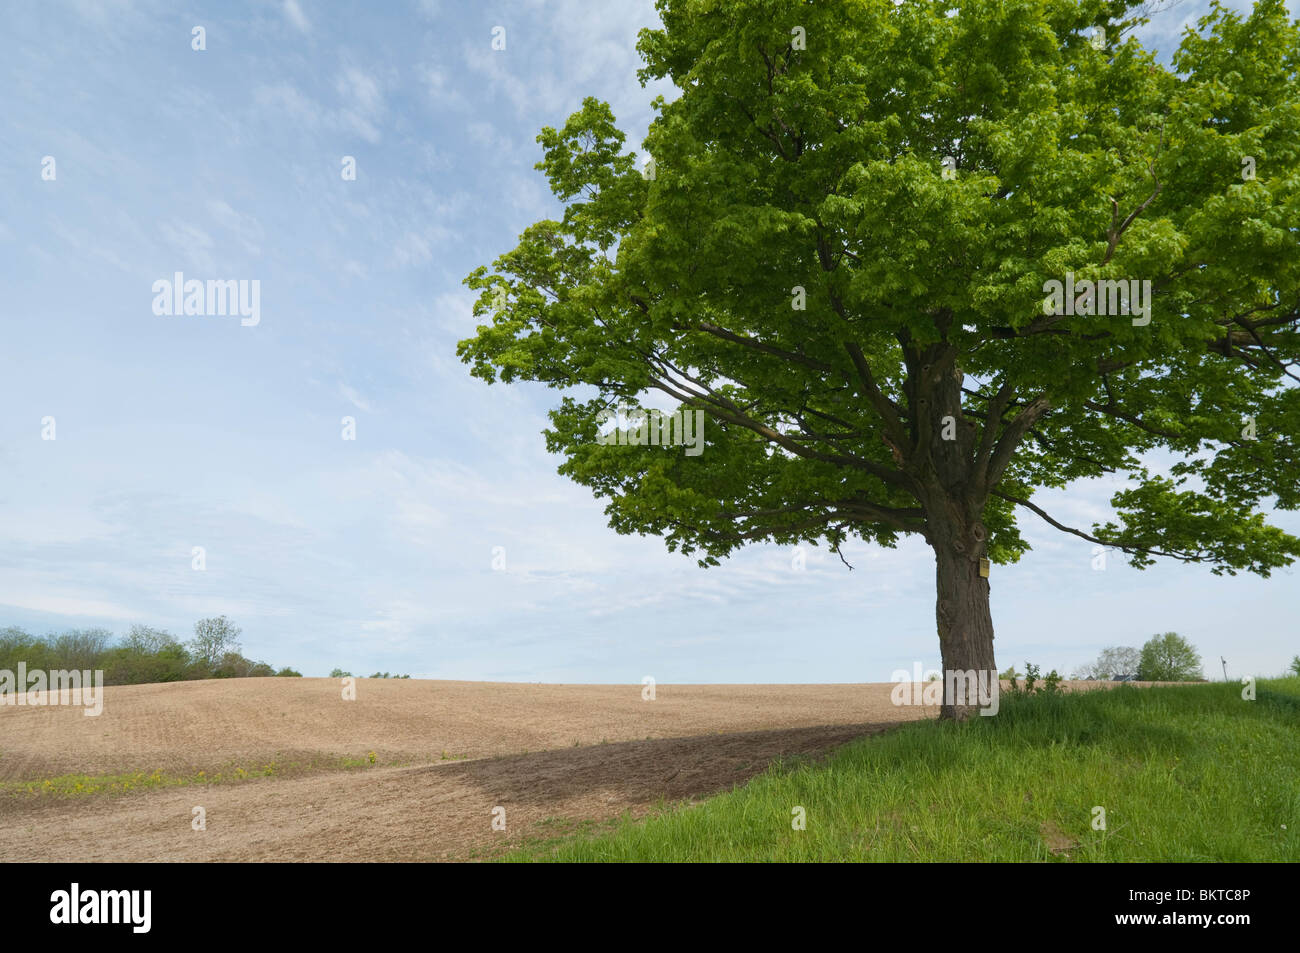 Roadside view of rural countryside in the Niagara Region. Stock Photo